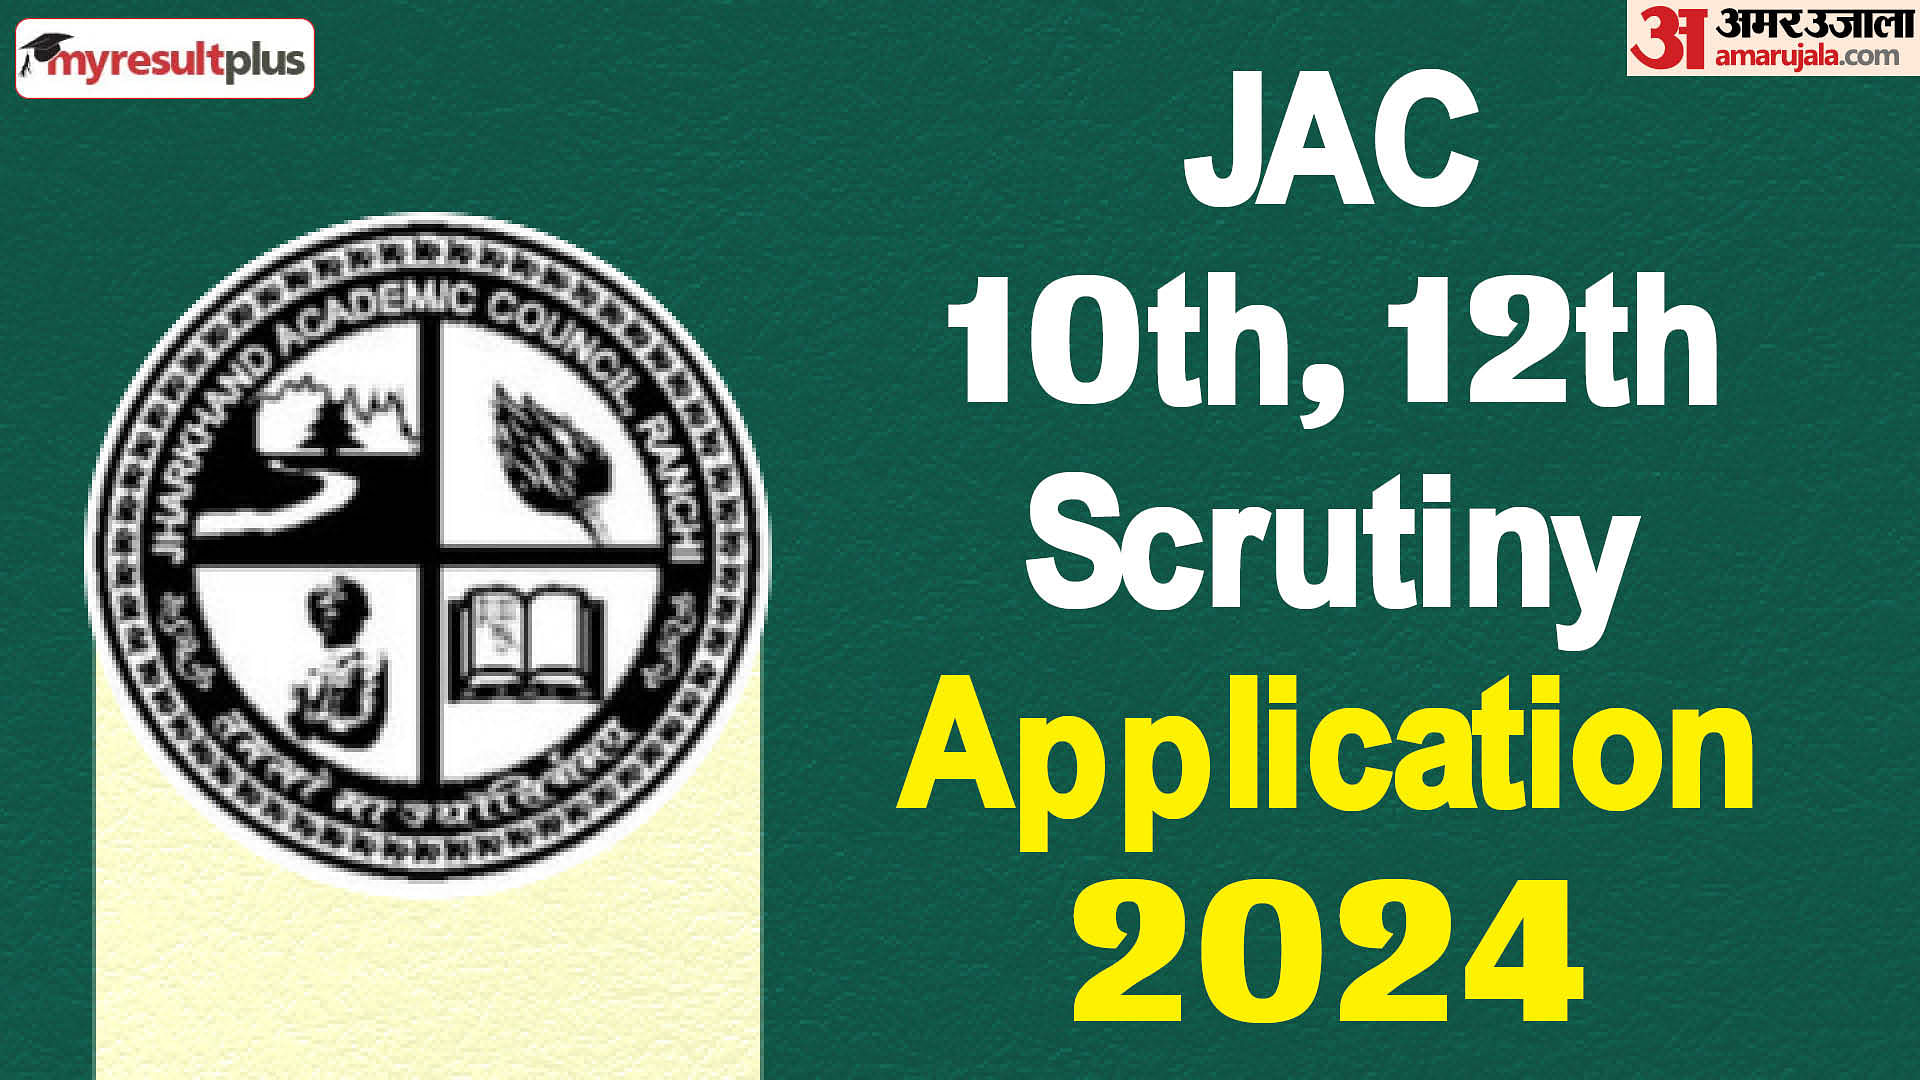 JAC 10th, 12th Scrutiny 2024 Application window closing today, Apply by 8 pm at jac.jharkhand.gov.in